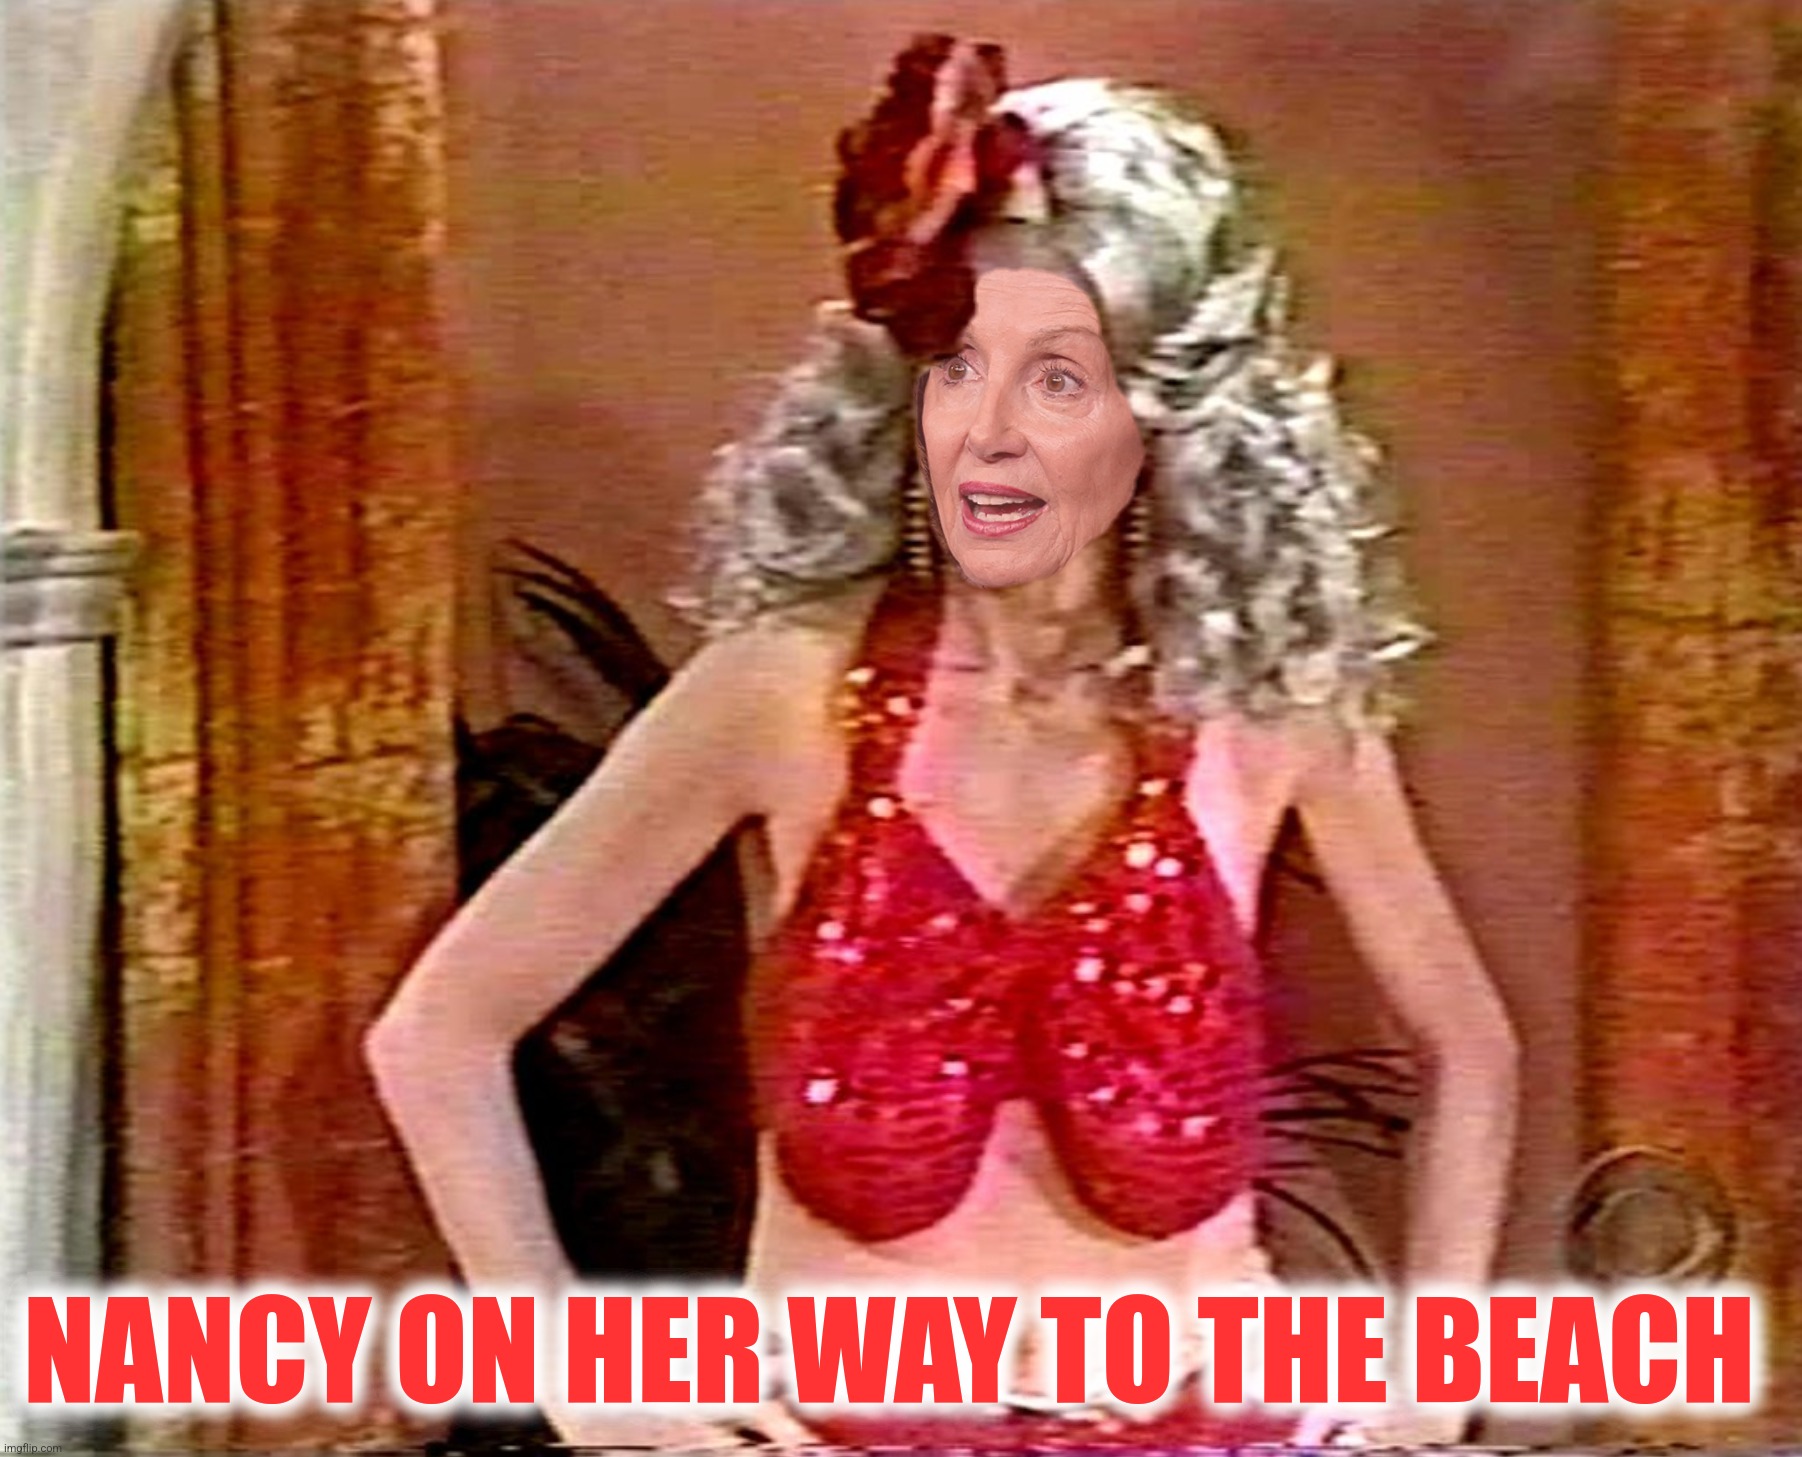 NANCY ON HER WAY TO THE BEACH | made w/ Imgflip meme maker